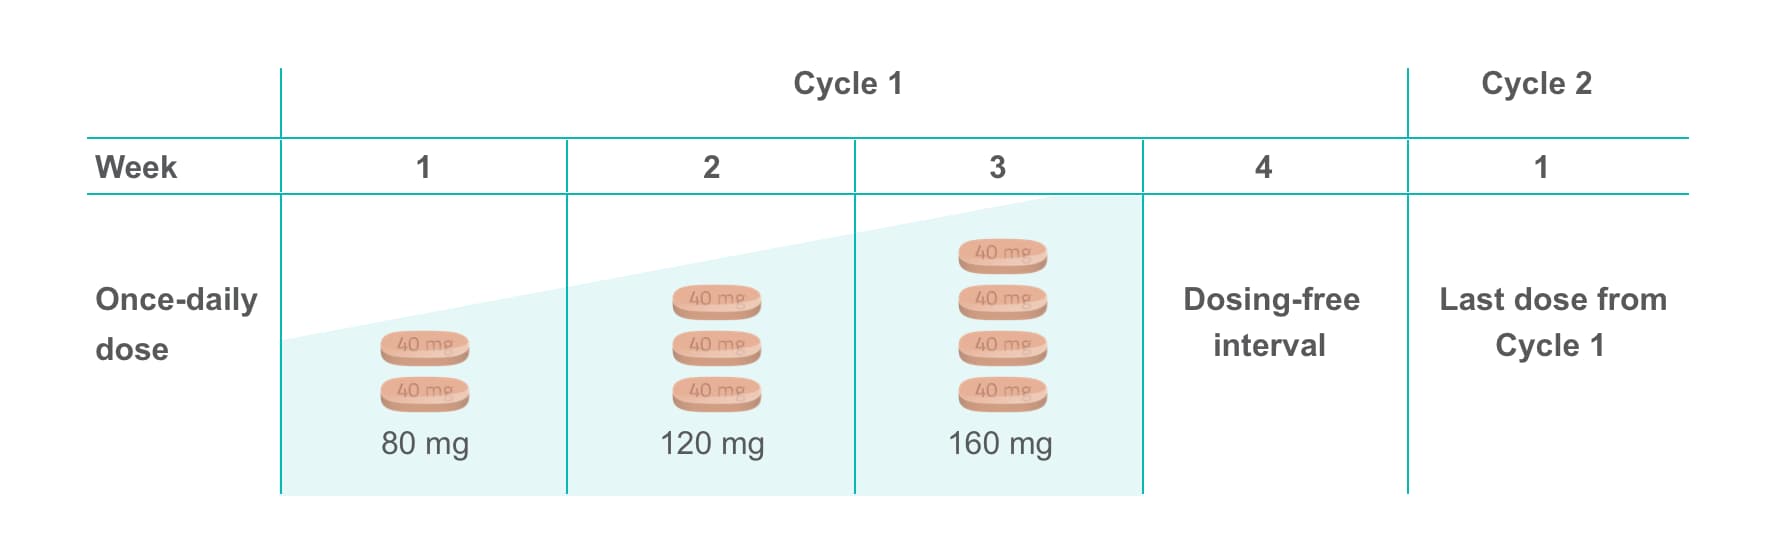 Table on the STIVARGA® (regorafenib) dose escalation schedule. Cycle 1: 80 mg (2 tablets) in Week 1, 120 mg (3 tablets) in Week 2, 160 mg (4 tablets) in Week 3, dosing-free interval in Week 4. Cycle 2: Last dose from Cycle 1 in Week 1.